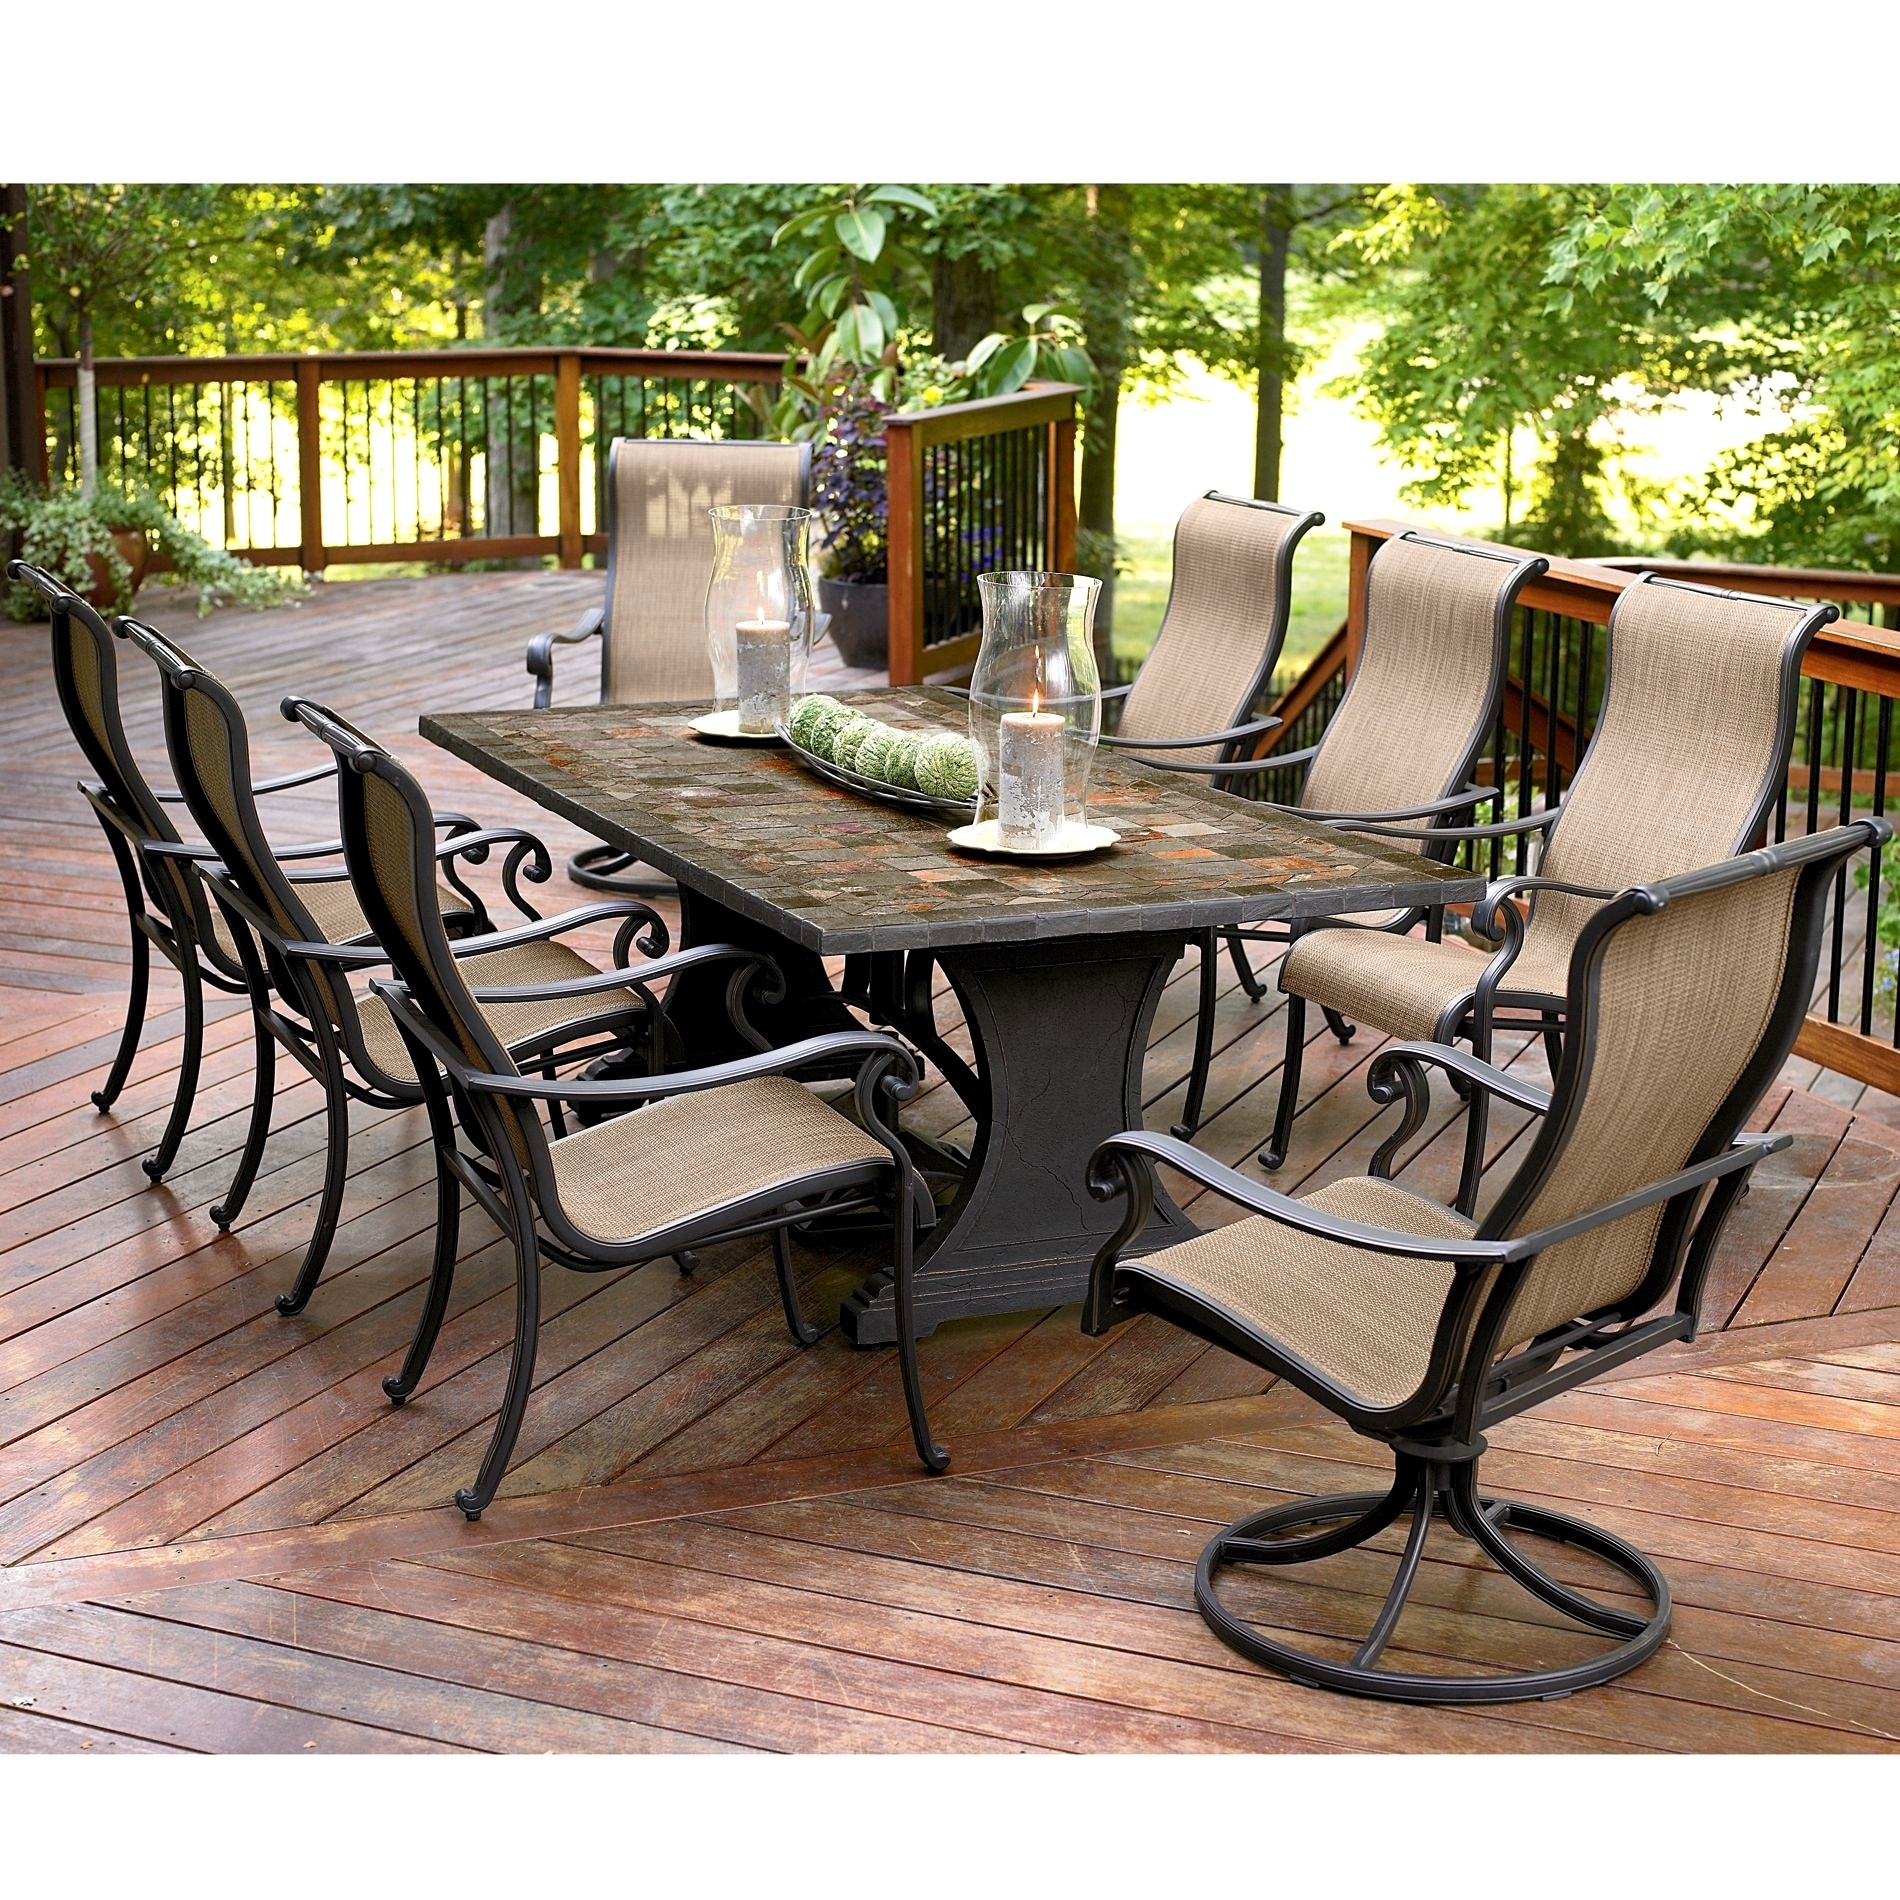 patio dining sets on clearance photo - 3